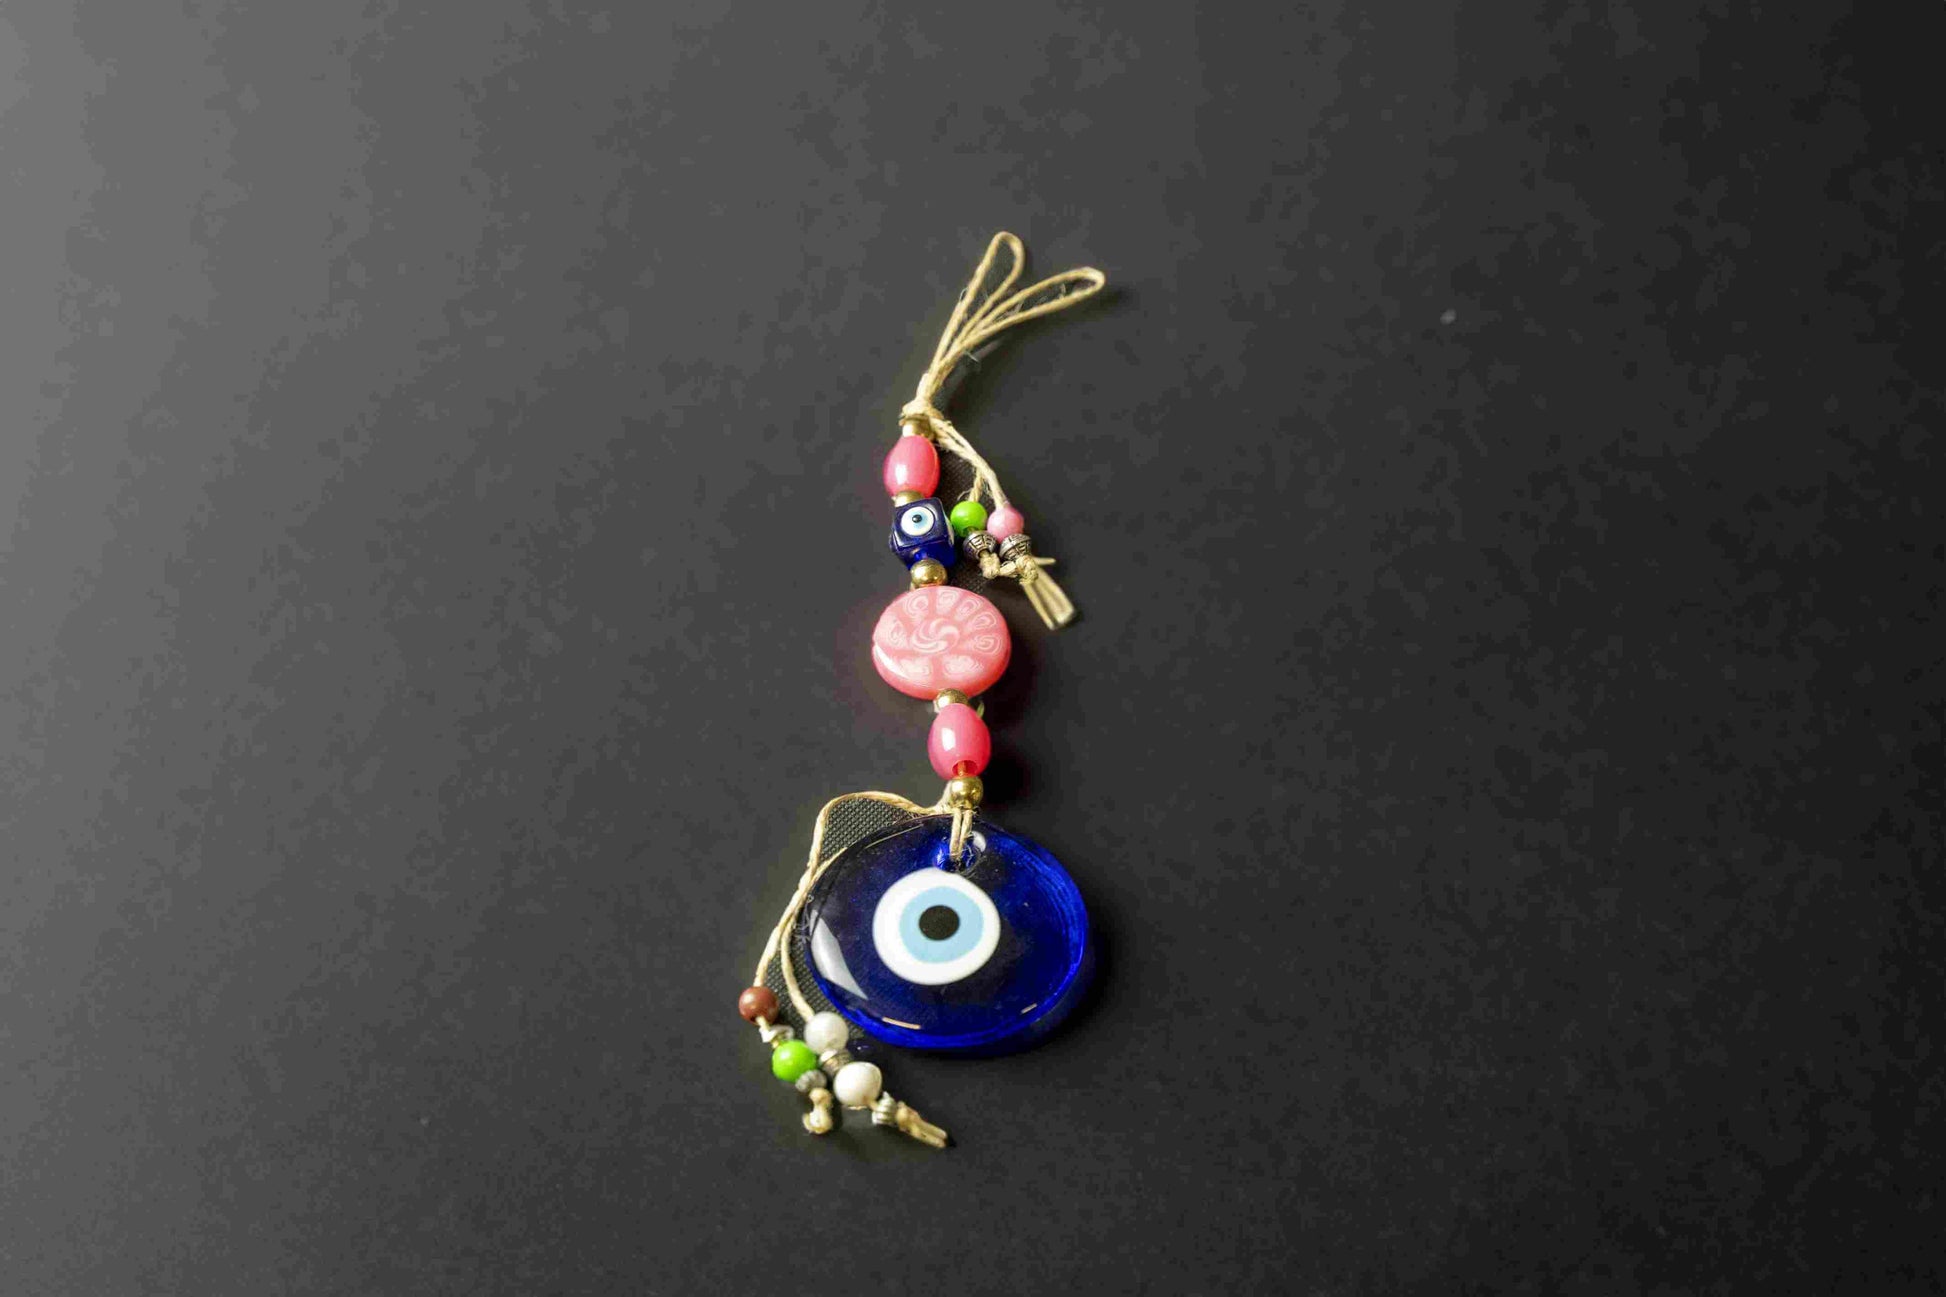 This 5cm hanging evil eye is a great way to harness the protective power of ancient mythology and ward off negative energy. Its unique design is used to safeguard your home and draw positive energy, helping you create a safe and welcoming environment. "Th